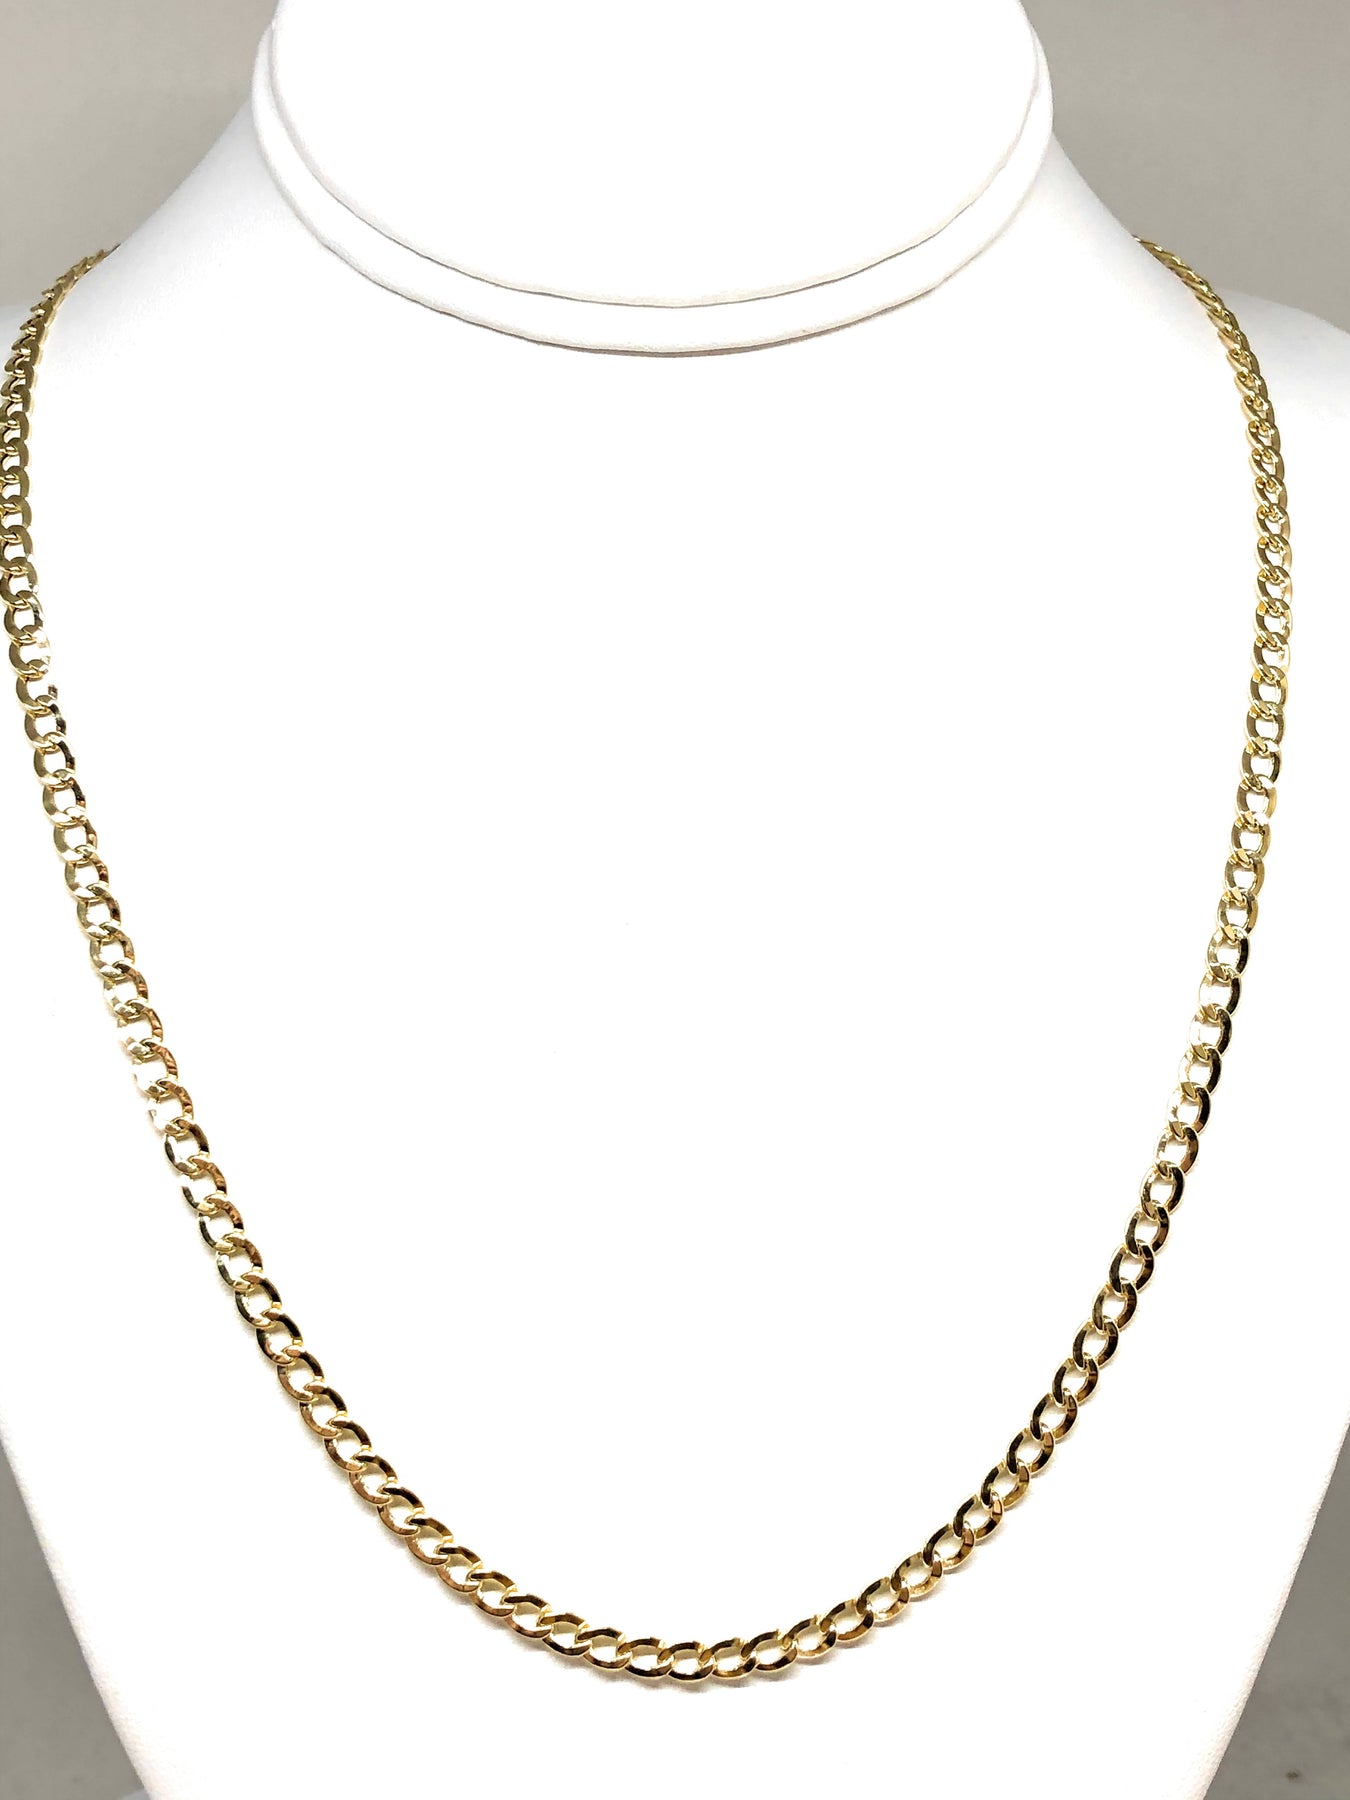 10k Solid Gold Yellow Cuban Link Chain 18-24 inches 3.5mm (Semi